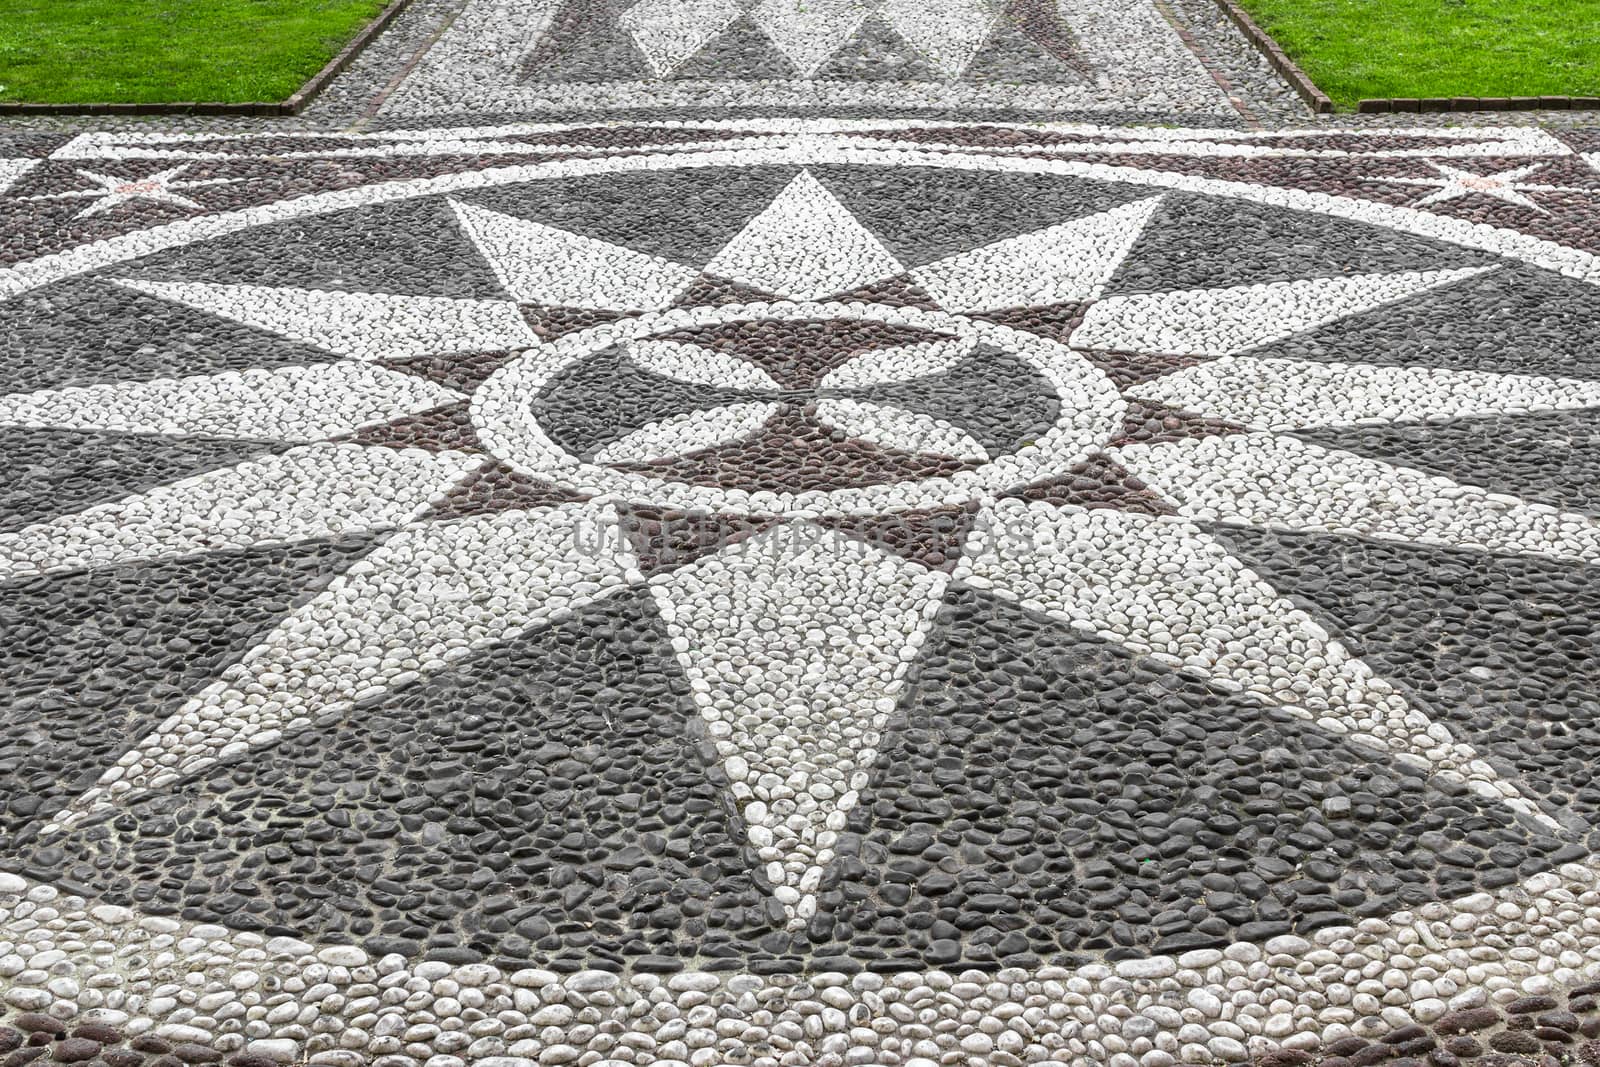 A stone mosaic depicting a twelve-pointed star, located at the entrance of a church.